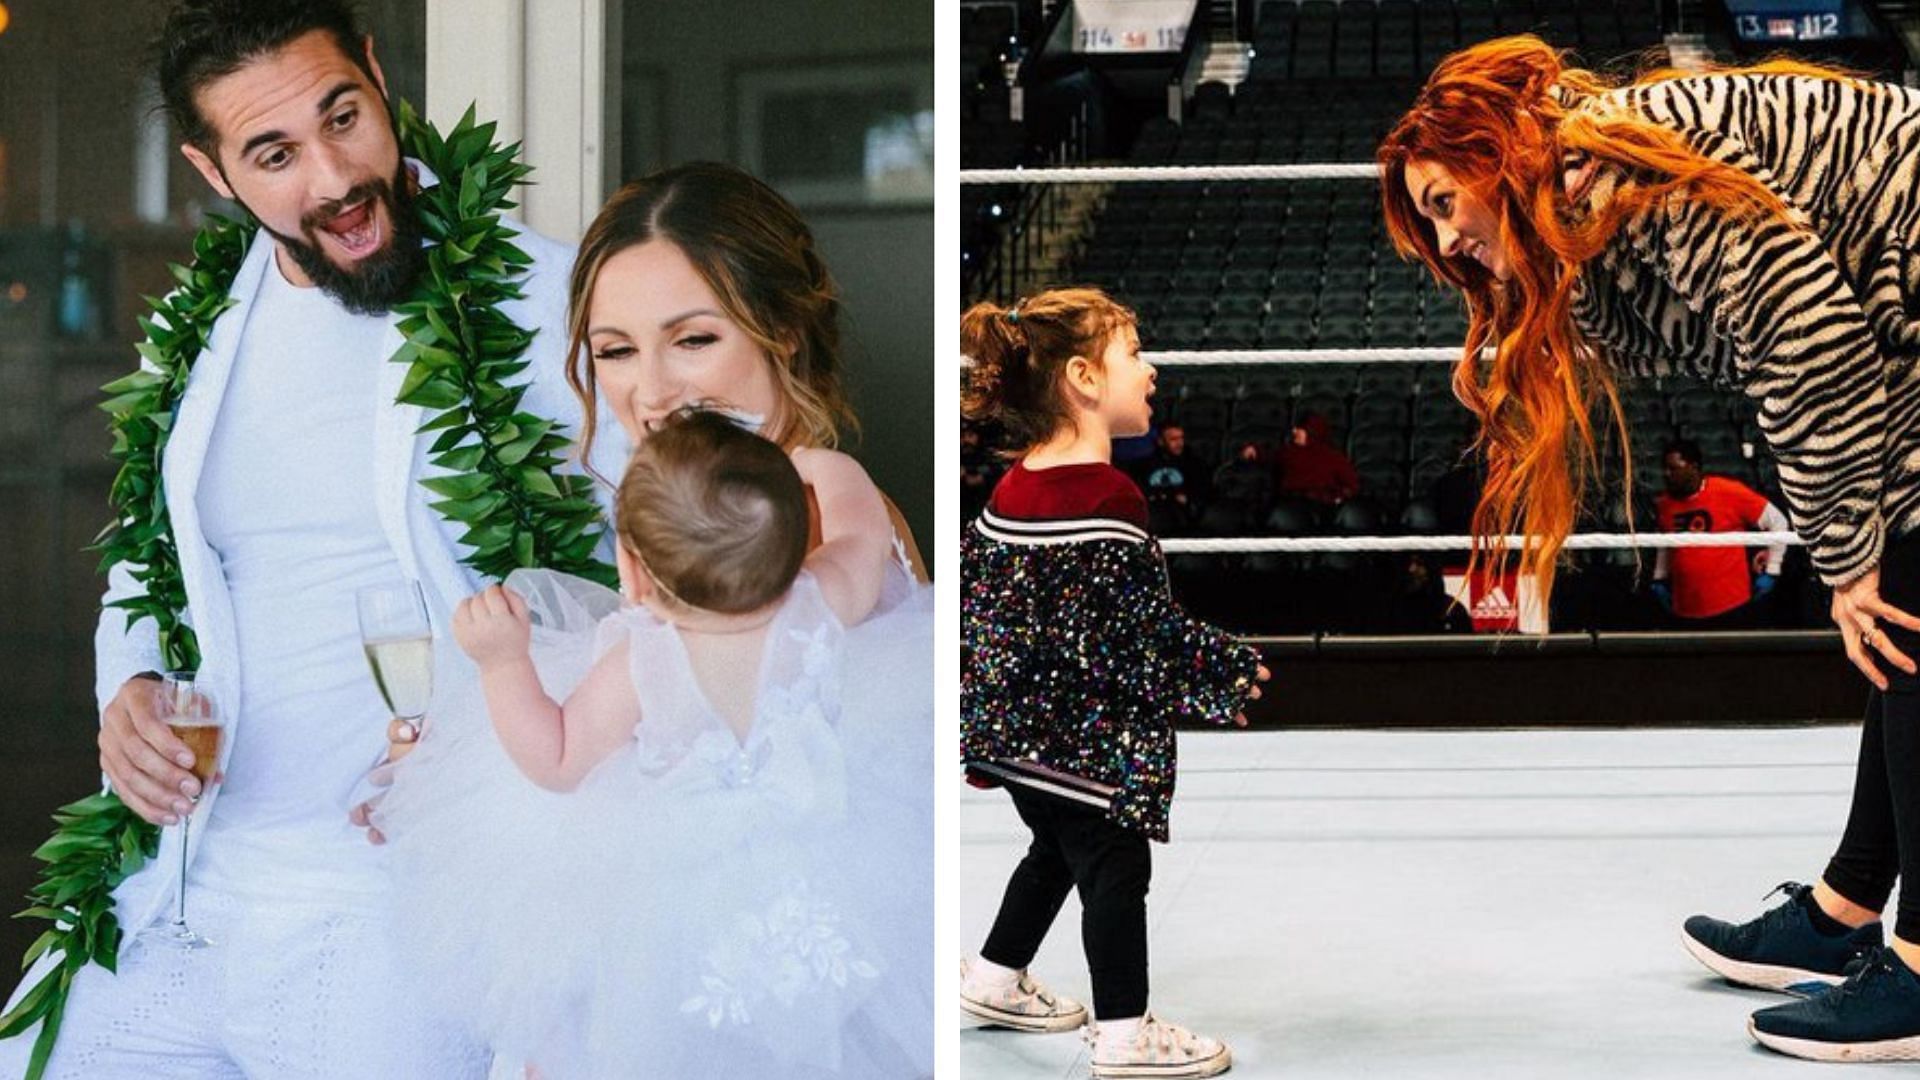 Becky Lynch and Seth Rollins have a daughter named Roux